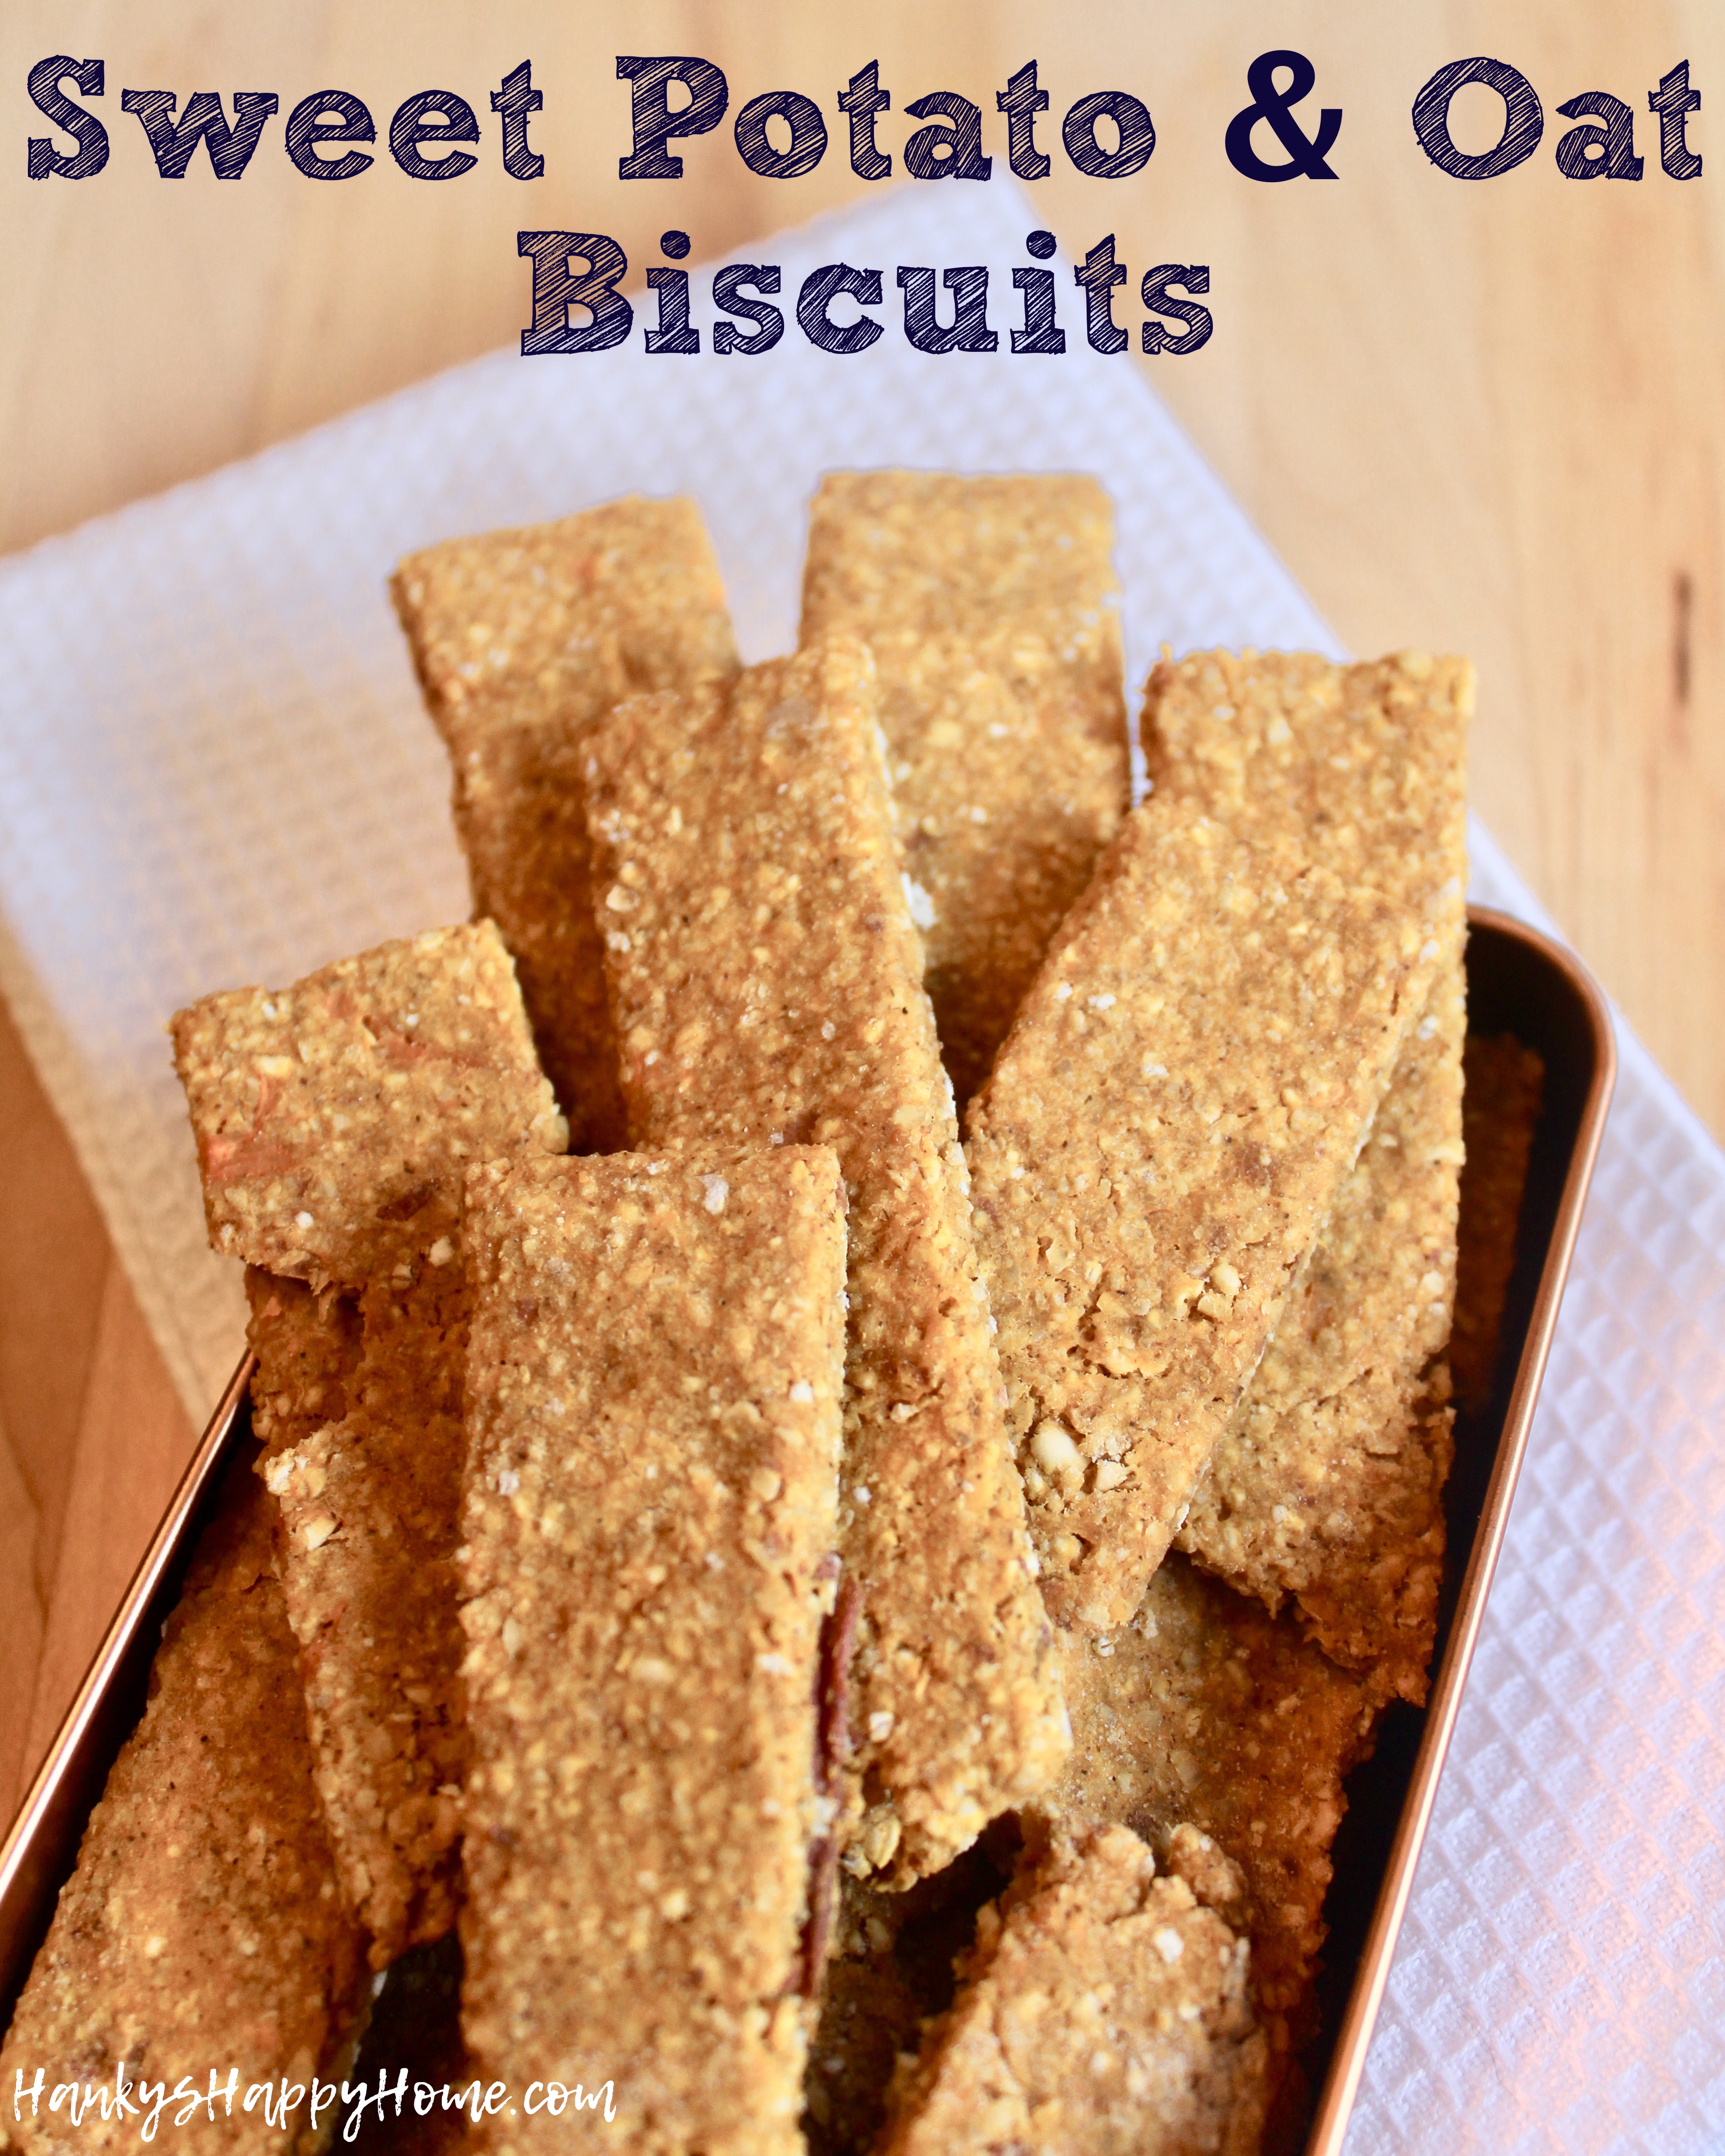 These Sweet Potato & Oat Biscuits combine yummy sweet potatoes with hearty oats. Make them as easy finger food or a homemade teething biscuit.